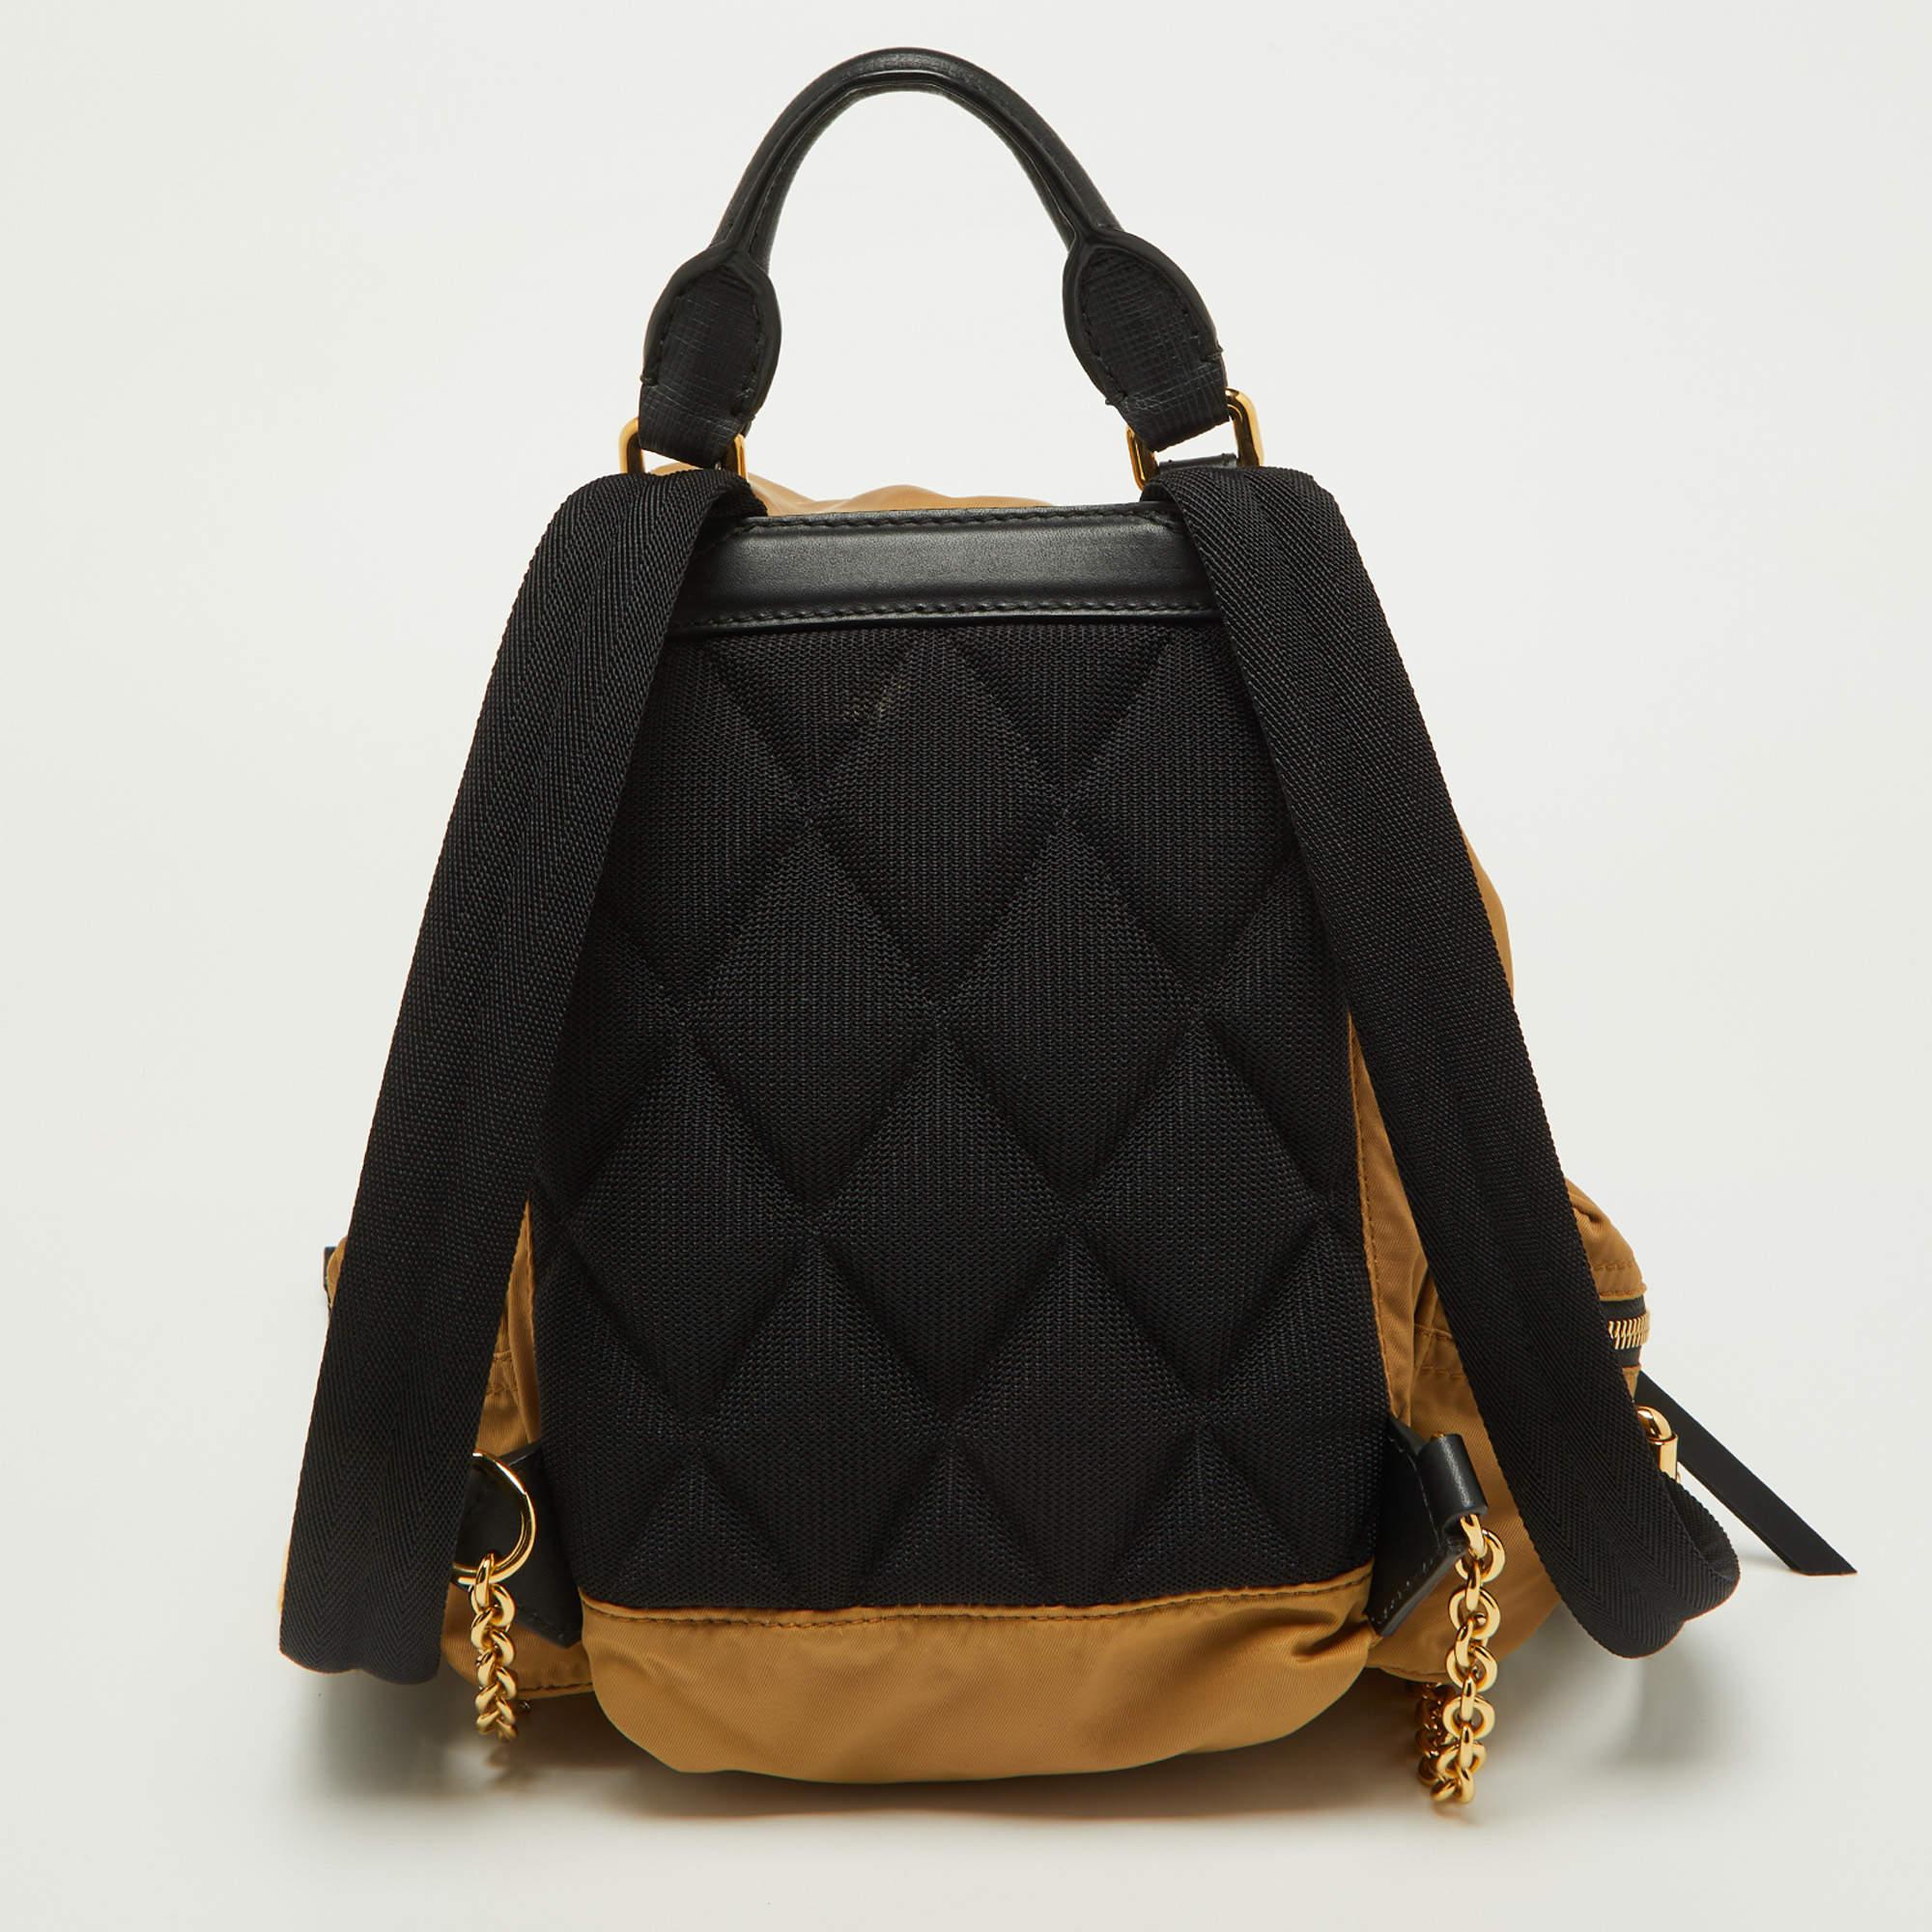 Marked by flawless craftsmanship and enduring appeal, this Burberry backpack is bound to be a versatile and durable accessory. It has a practical size.

